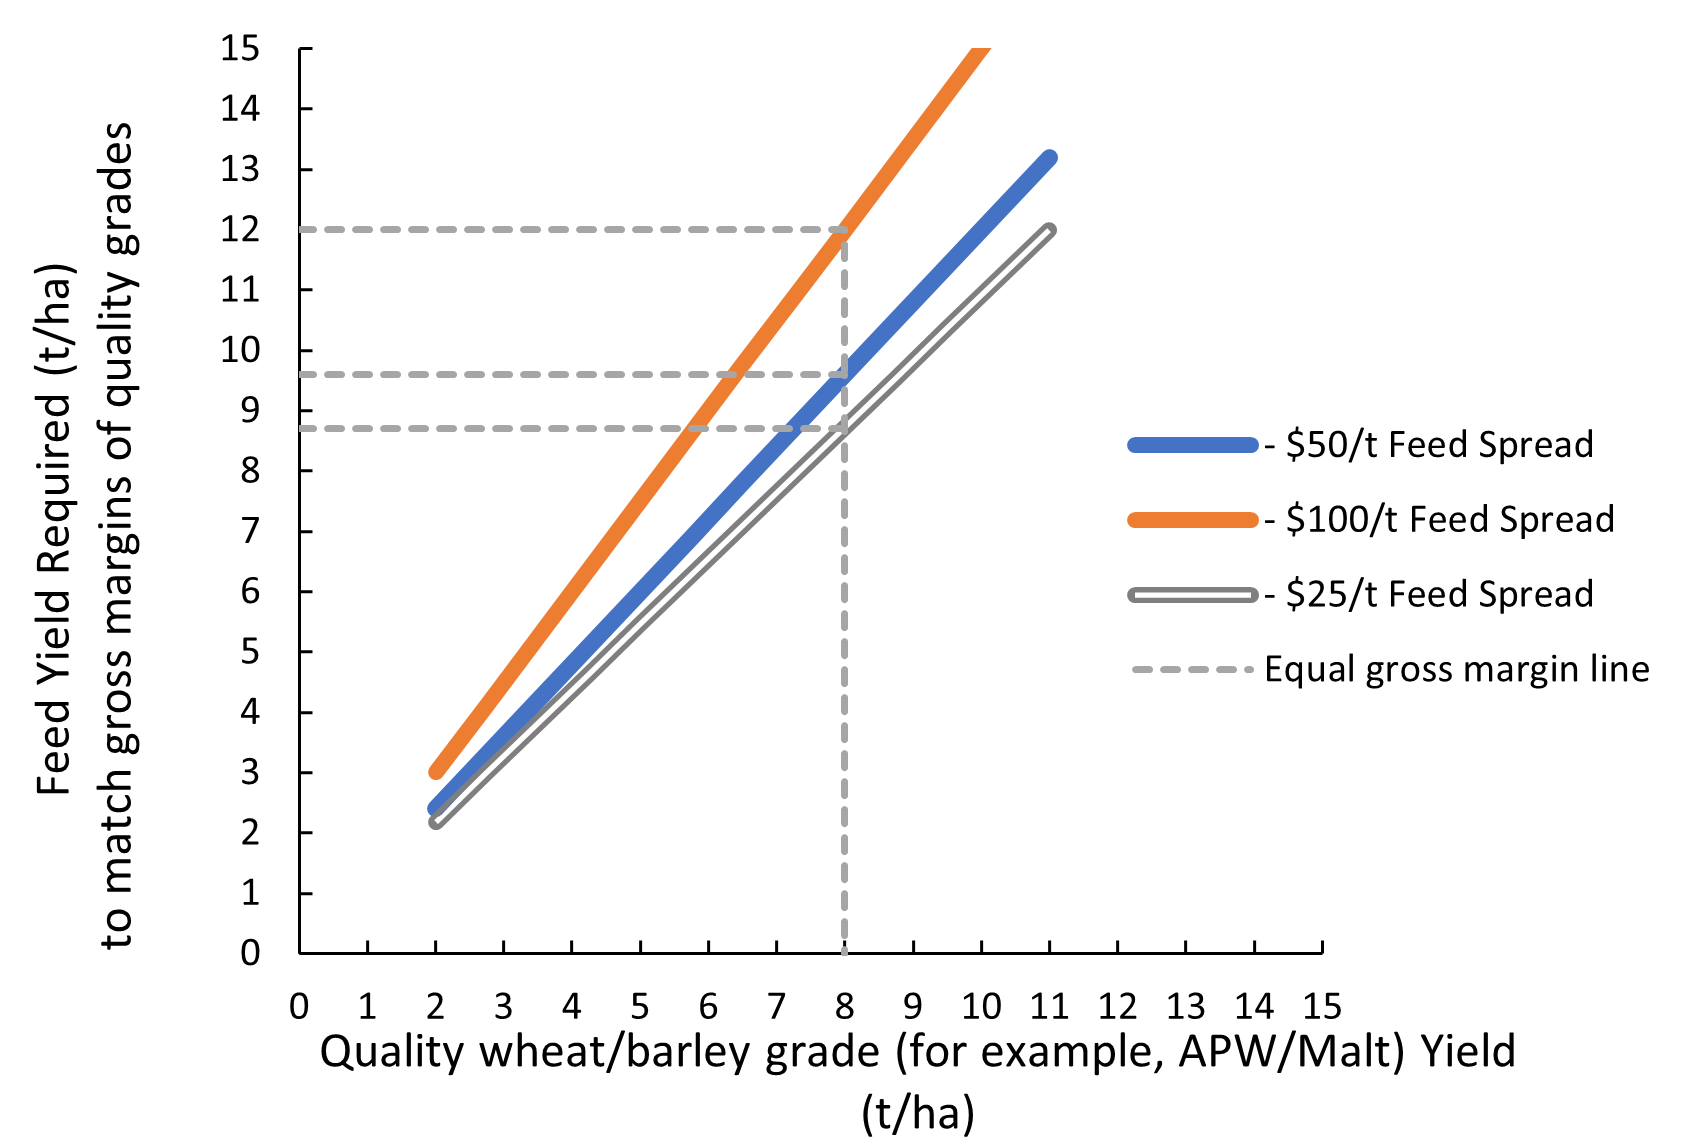 Relationship between the grain yield of feed cereals and quality grades required to achieve similar gross margin returns at different feed delivery price spreads (assuming quality delivery price is $300/t).